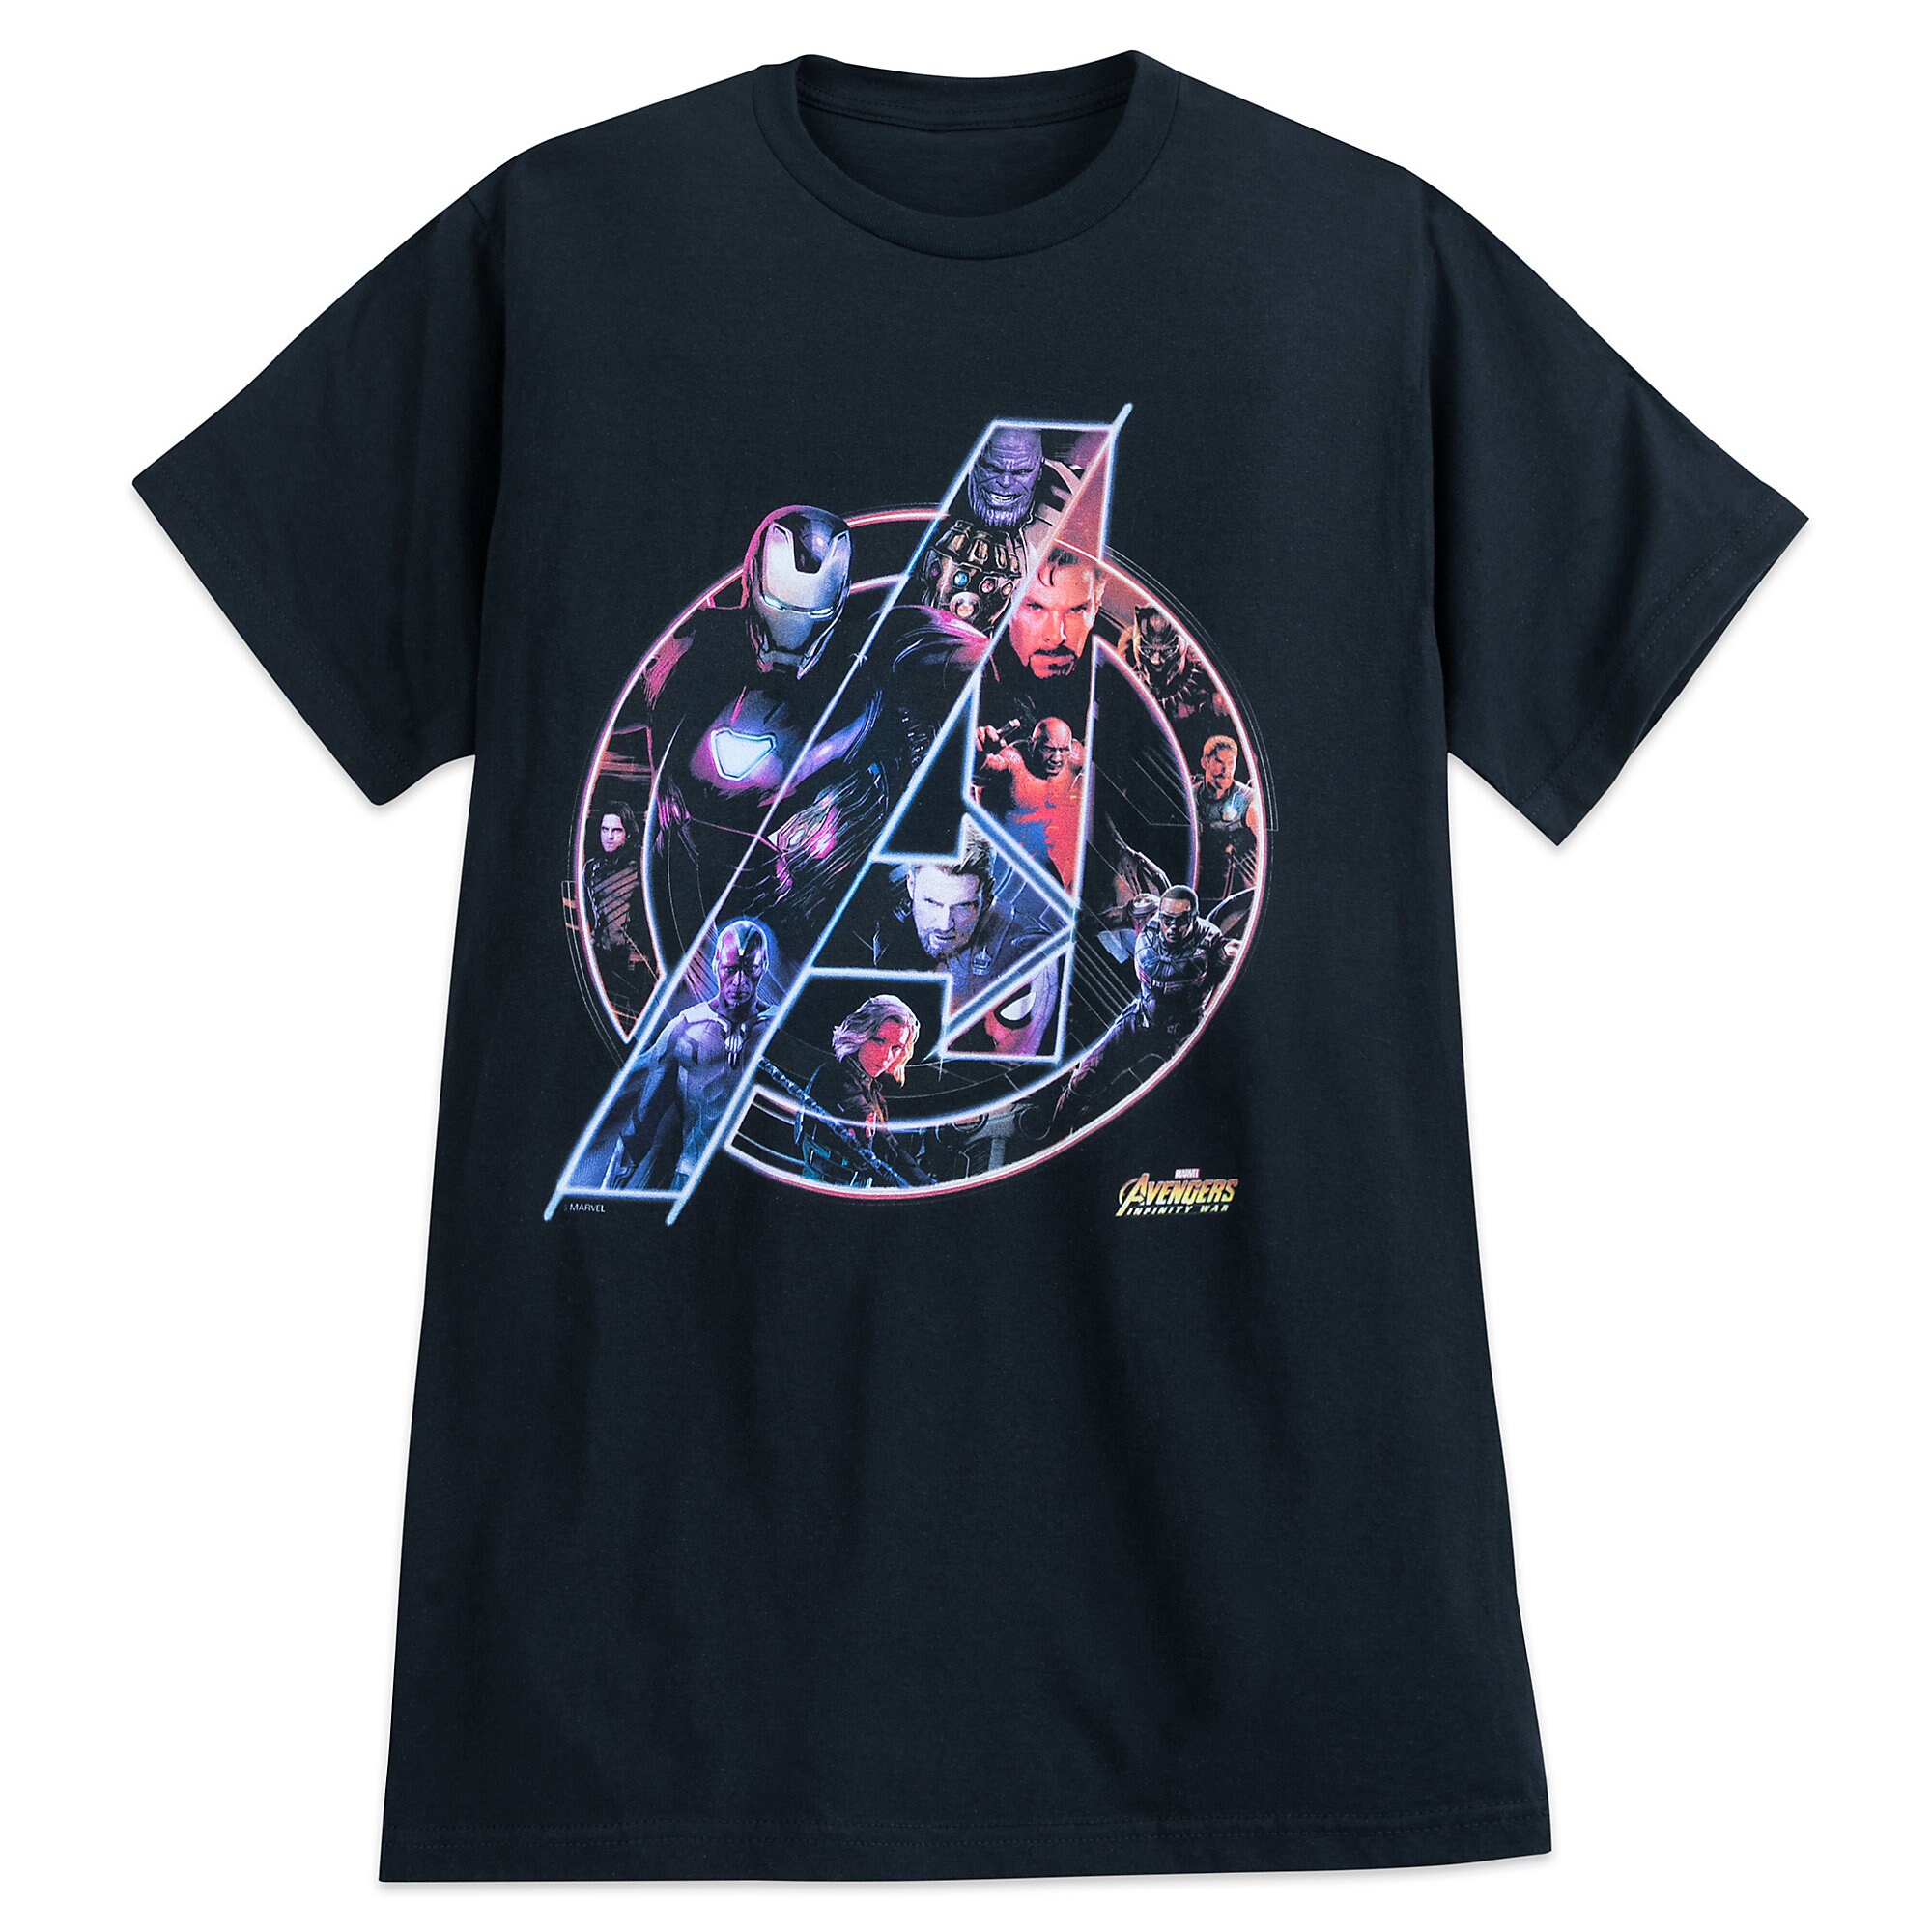 Avengers Icon T-Shirt for Adults - Marvel's Avengers: Infinity War